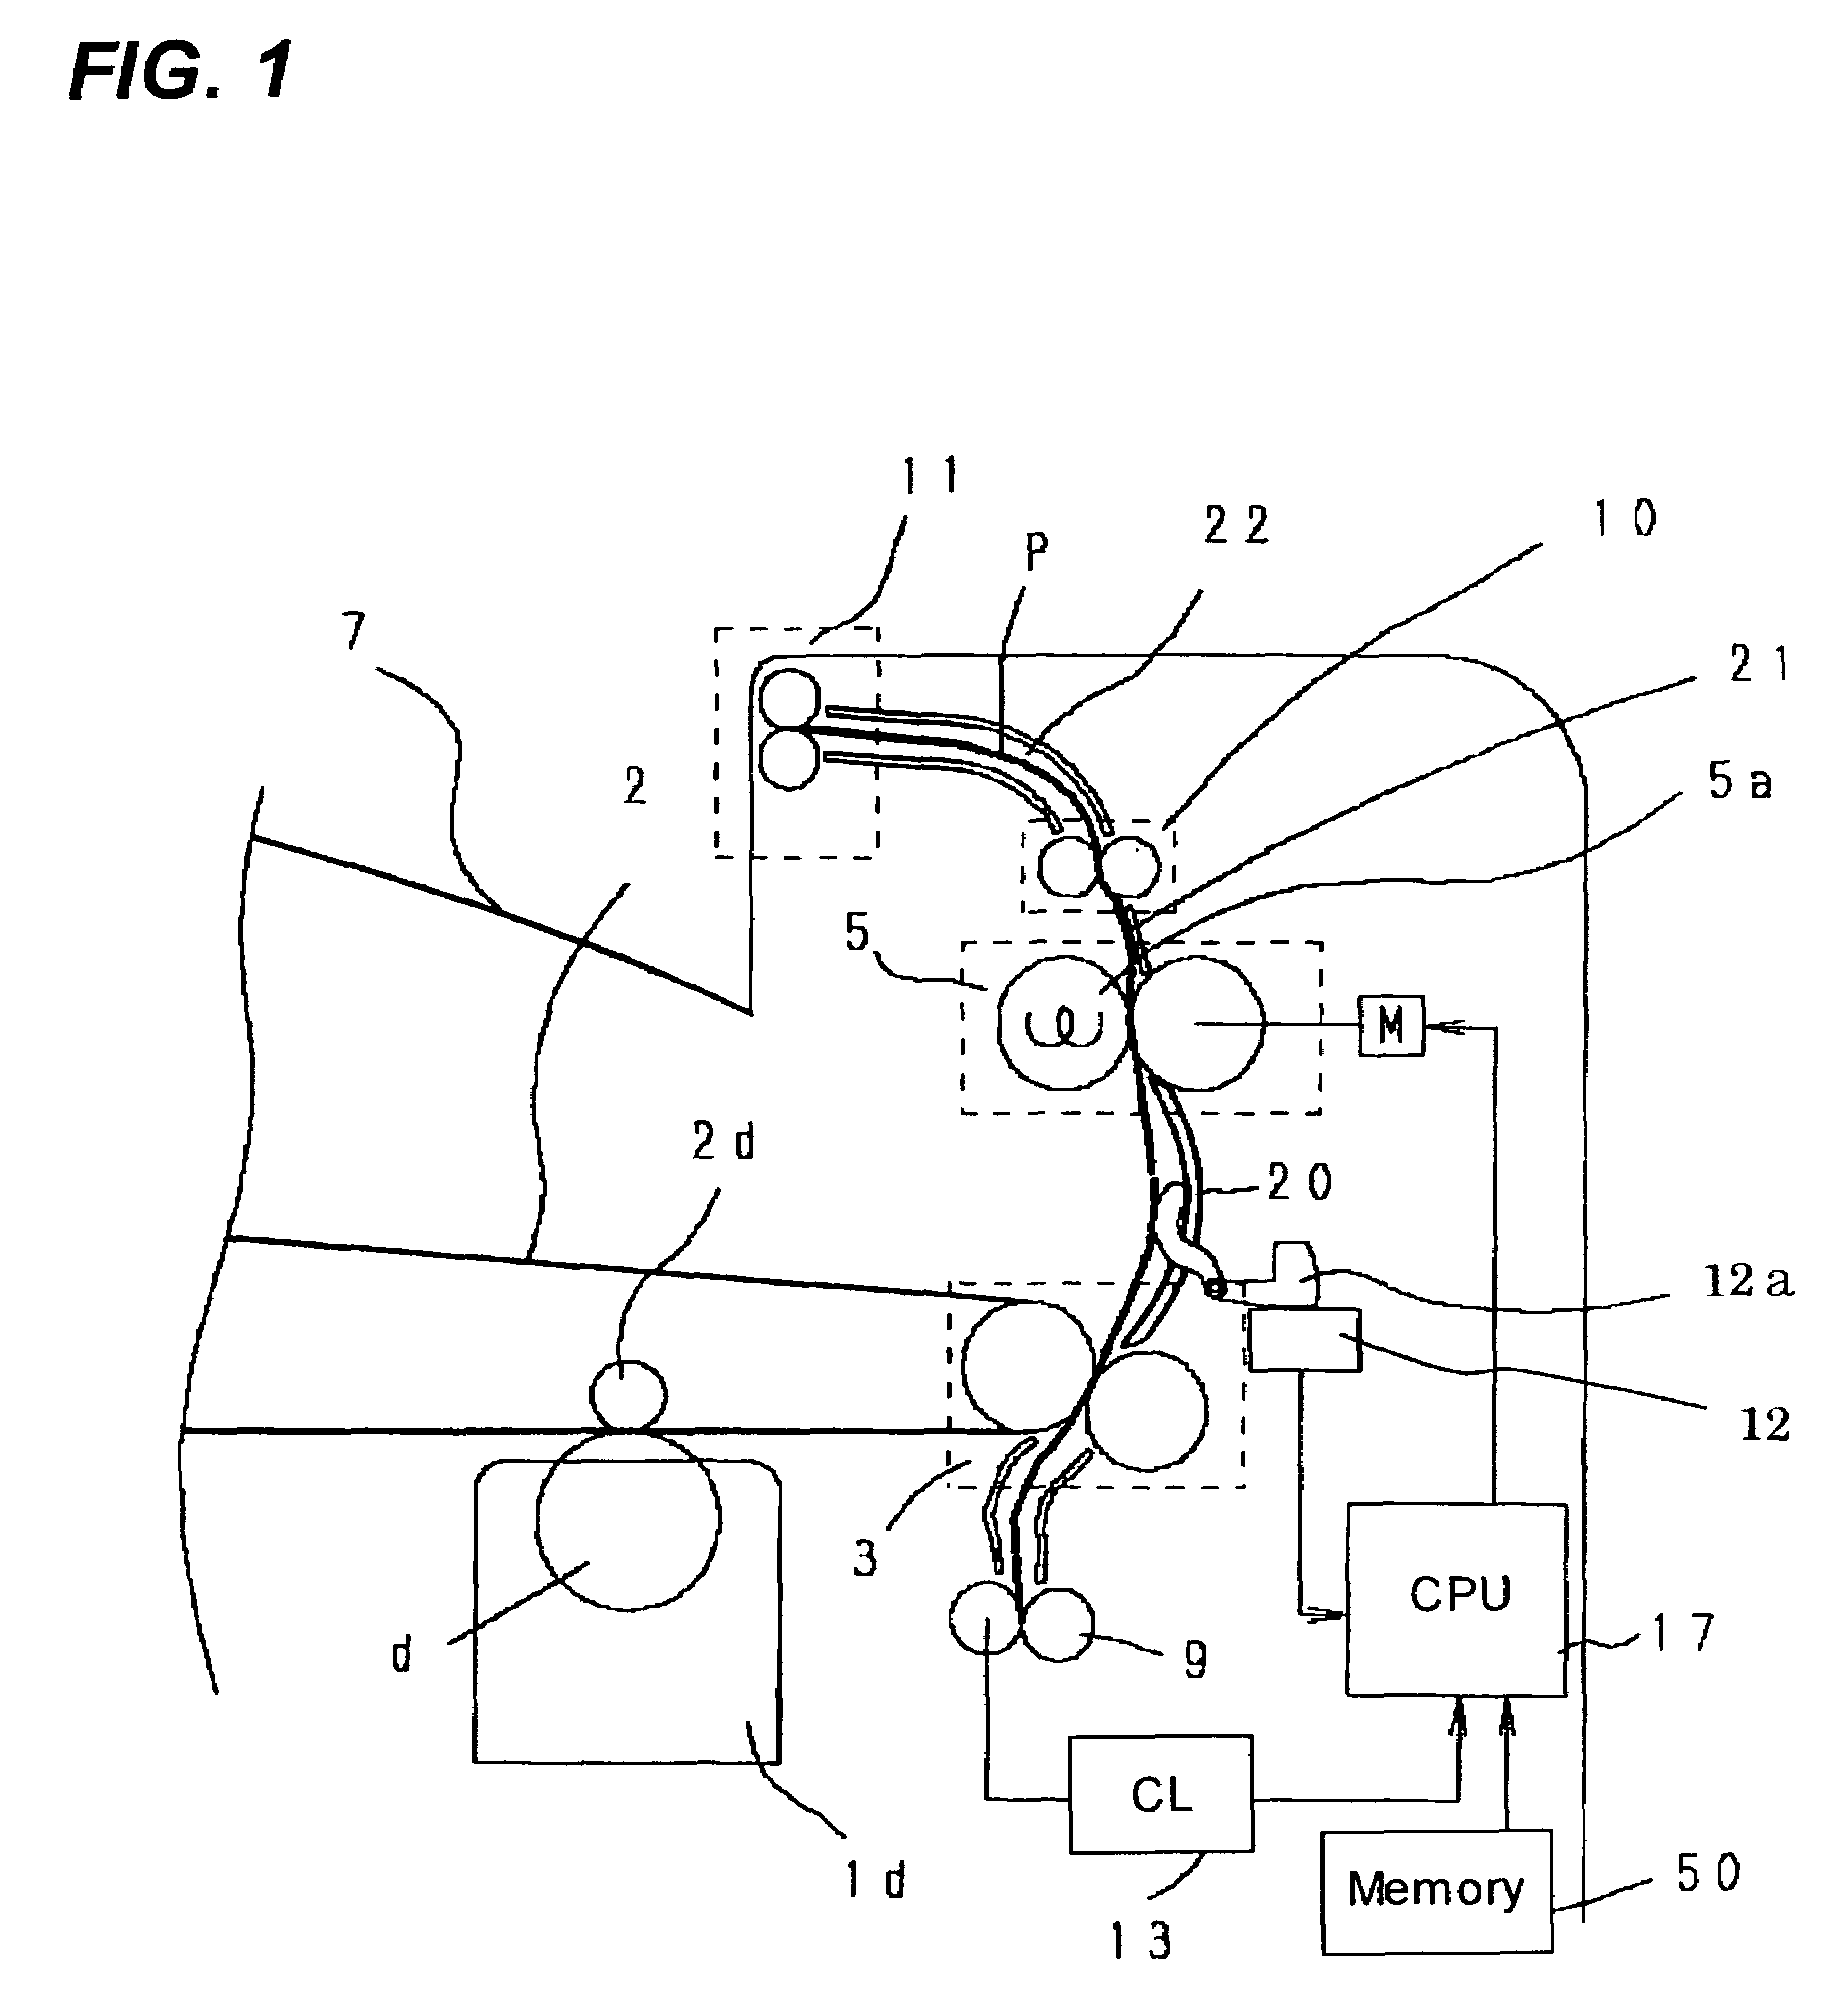 Image forming apparatus with conveyance speed control based in part on loop detection